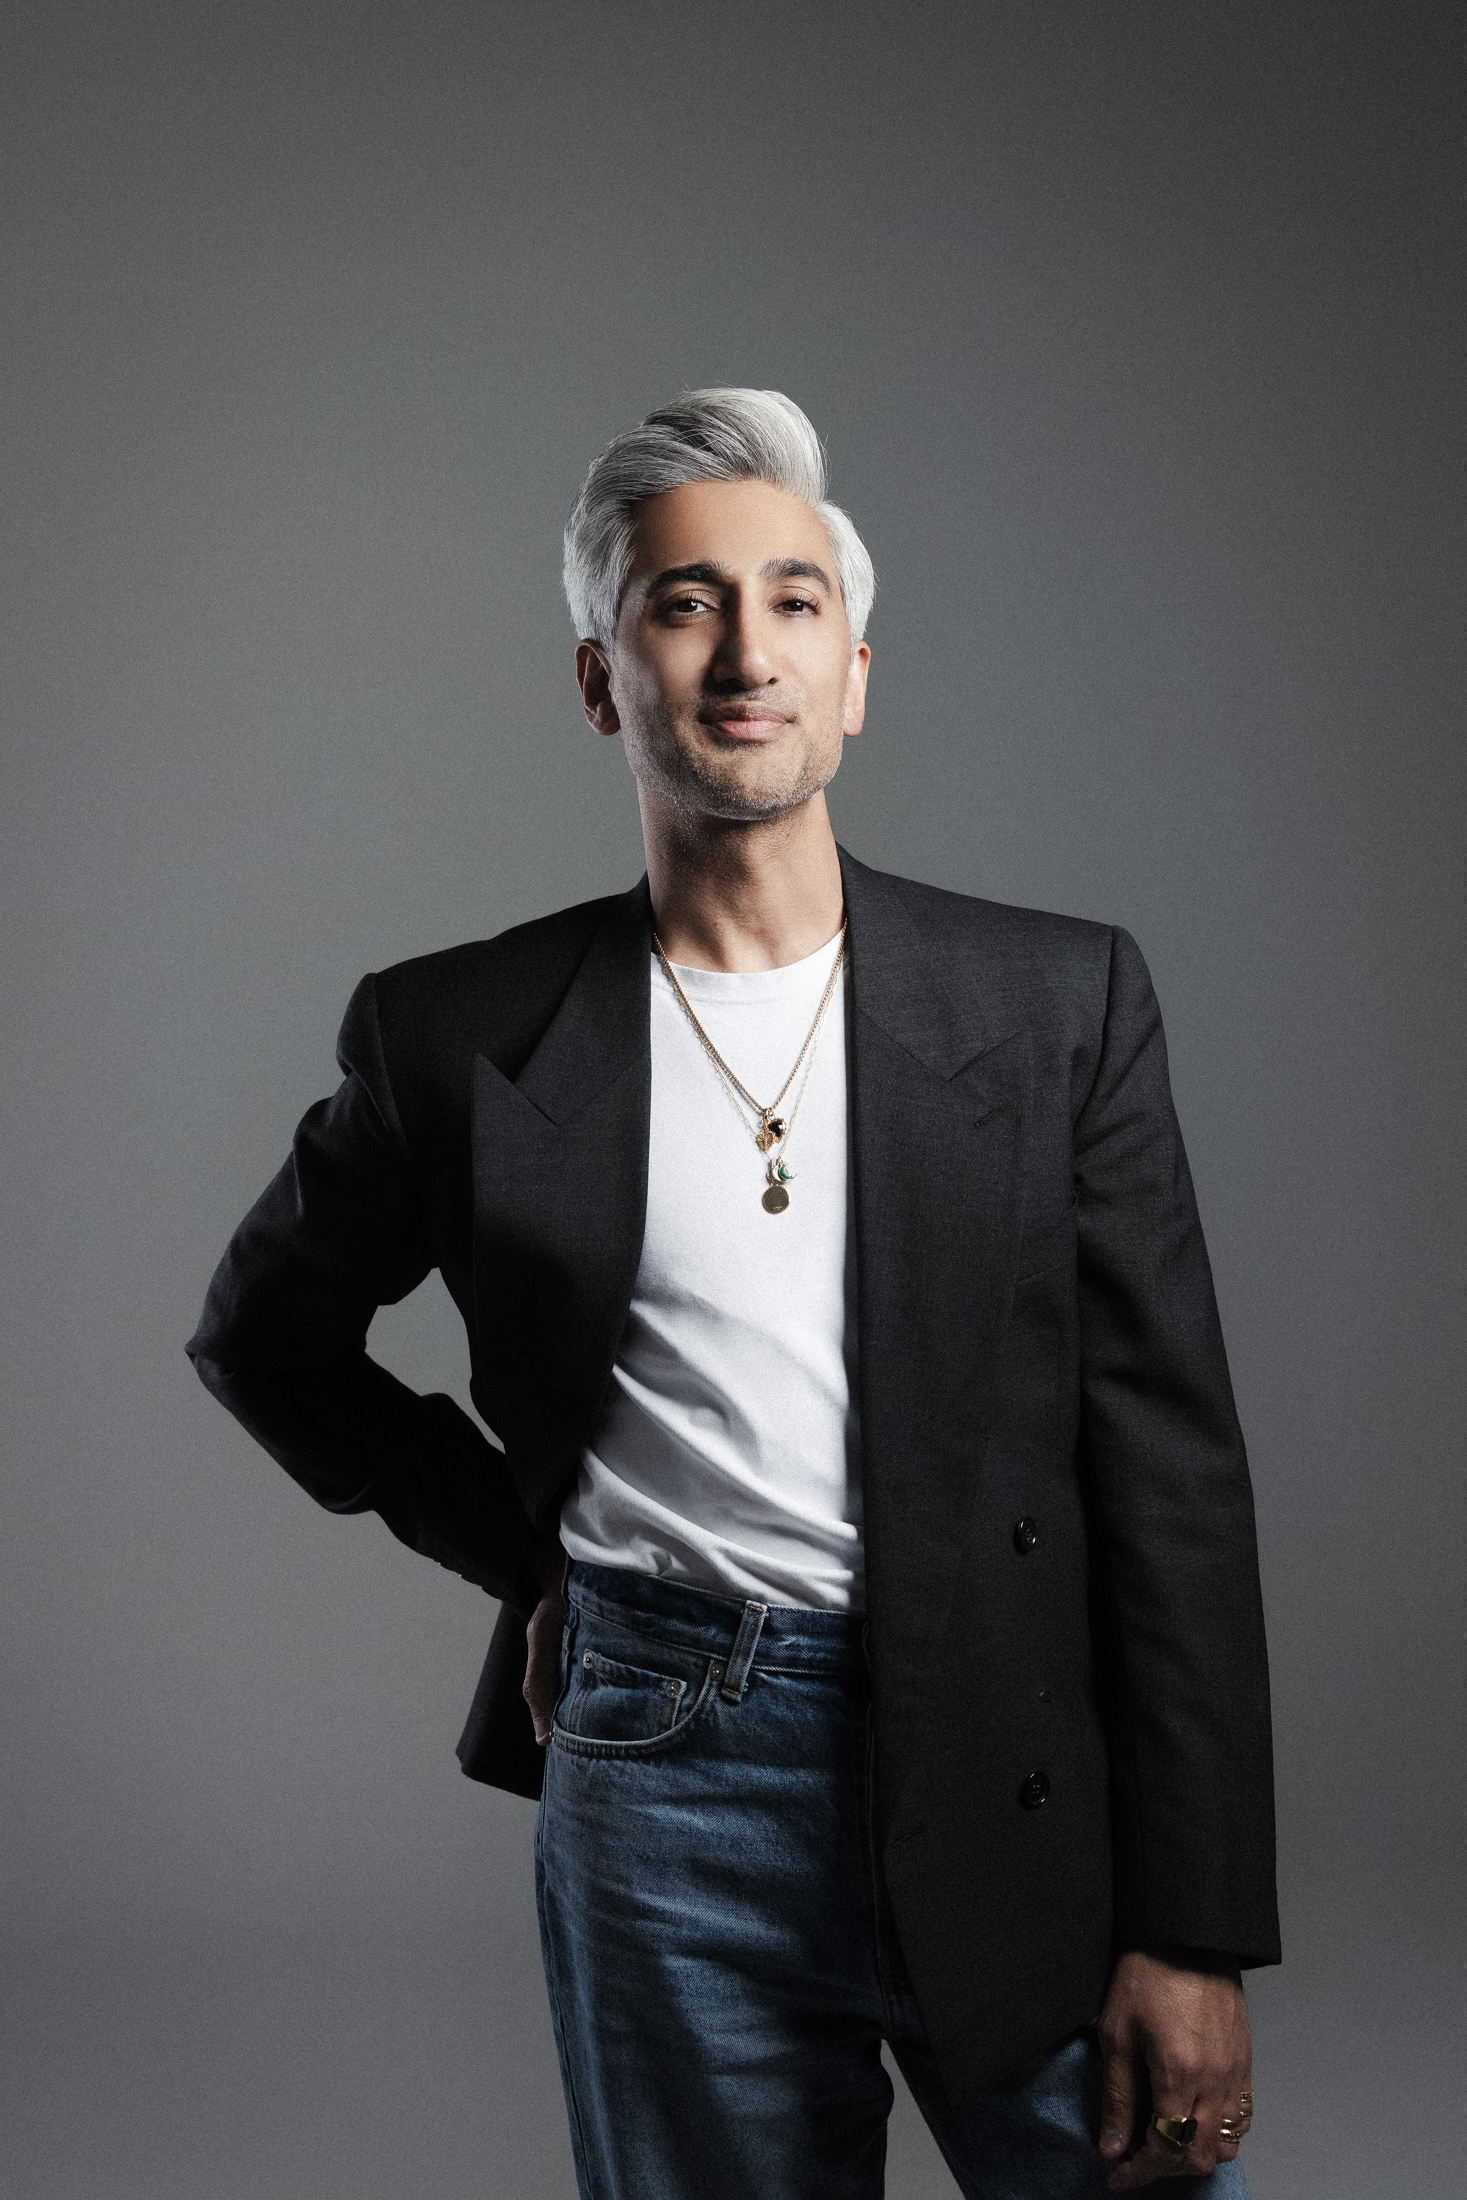 Tan France shares his secrets to staying relevant in fashion and business, trends for 2024, advice for fashion companies and more.